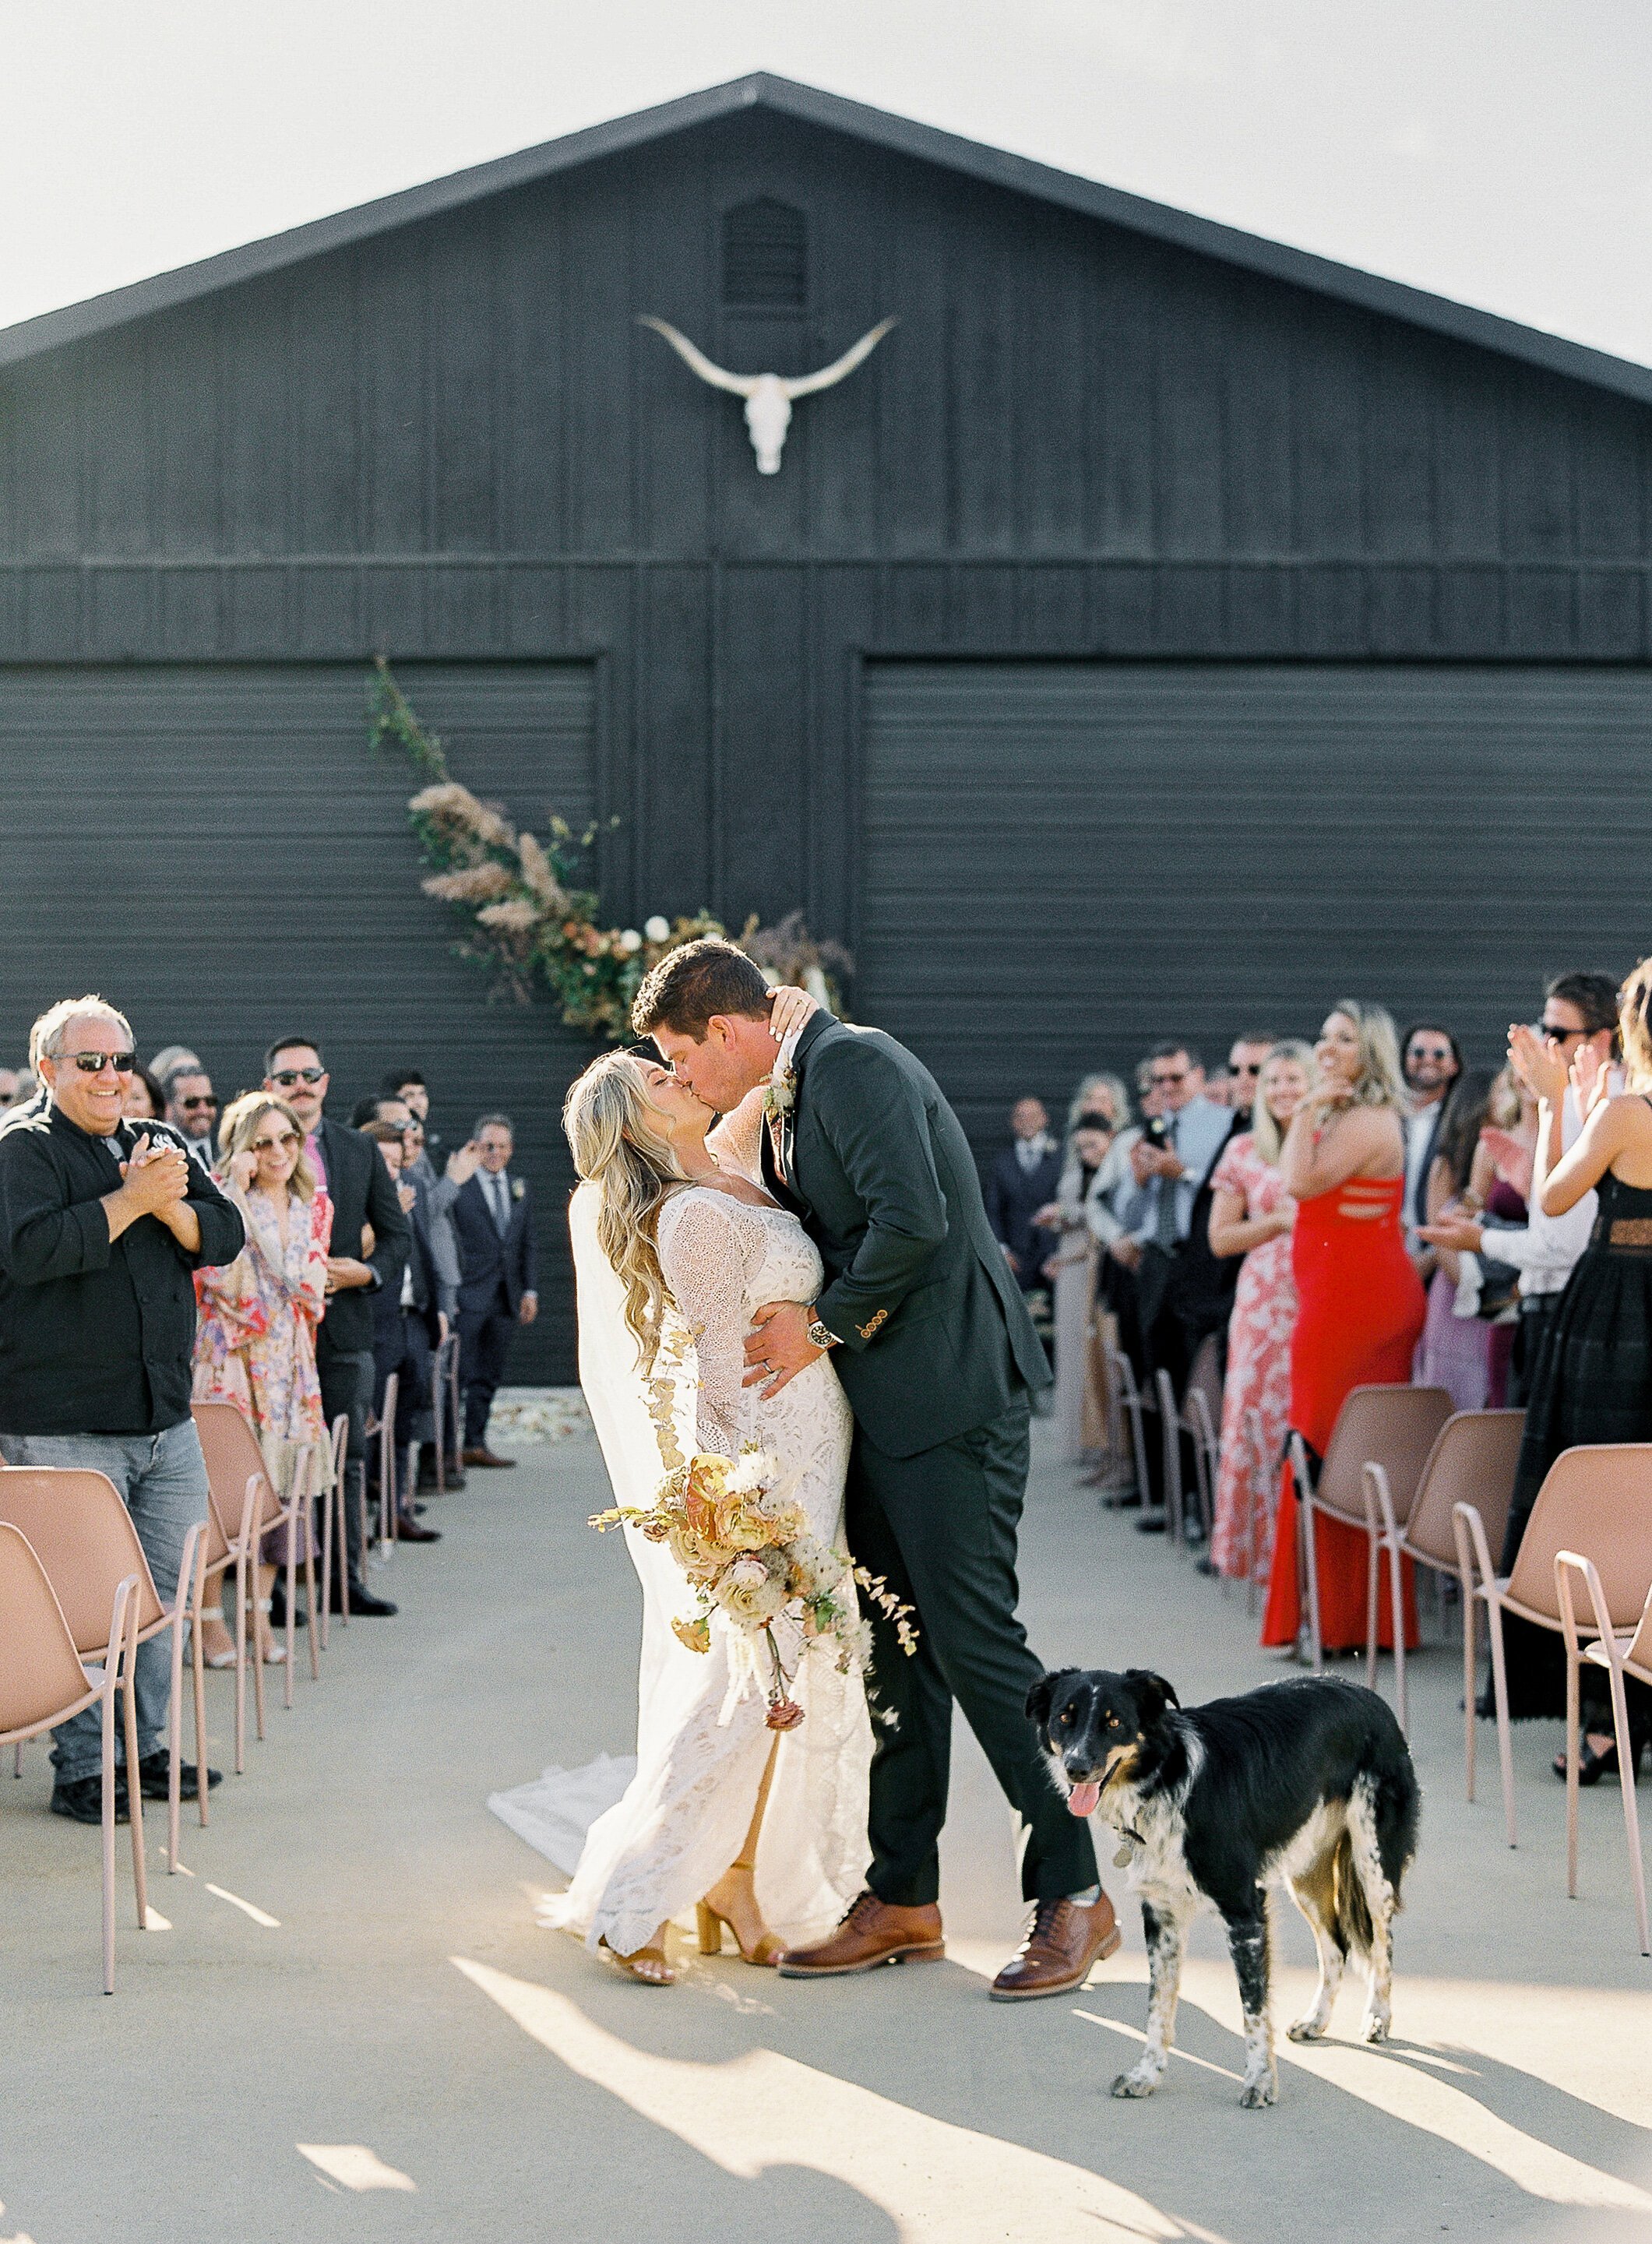 www.santabarbarawedding.com | Sposto Photography | Bride and Groom Kissing at Ceremony with Dog at Their Side  